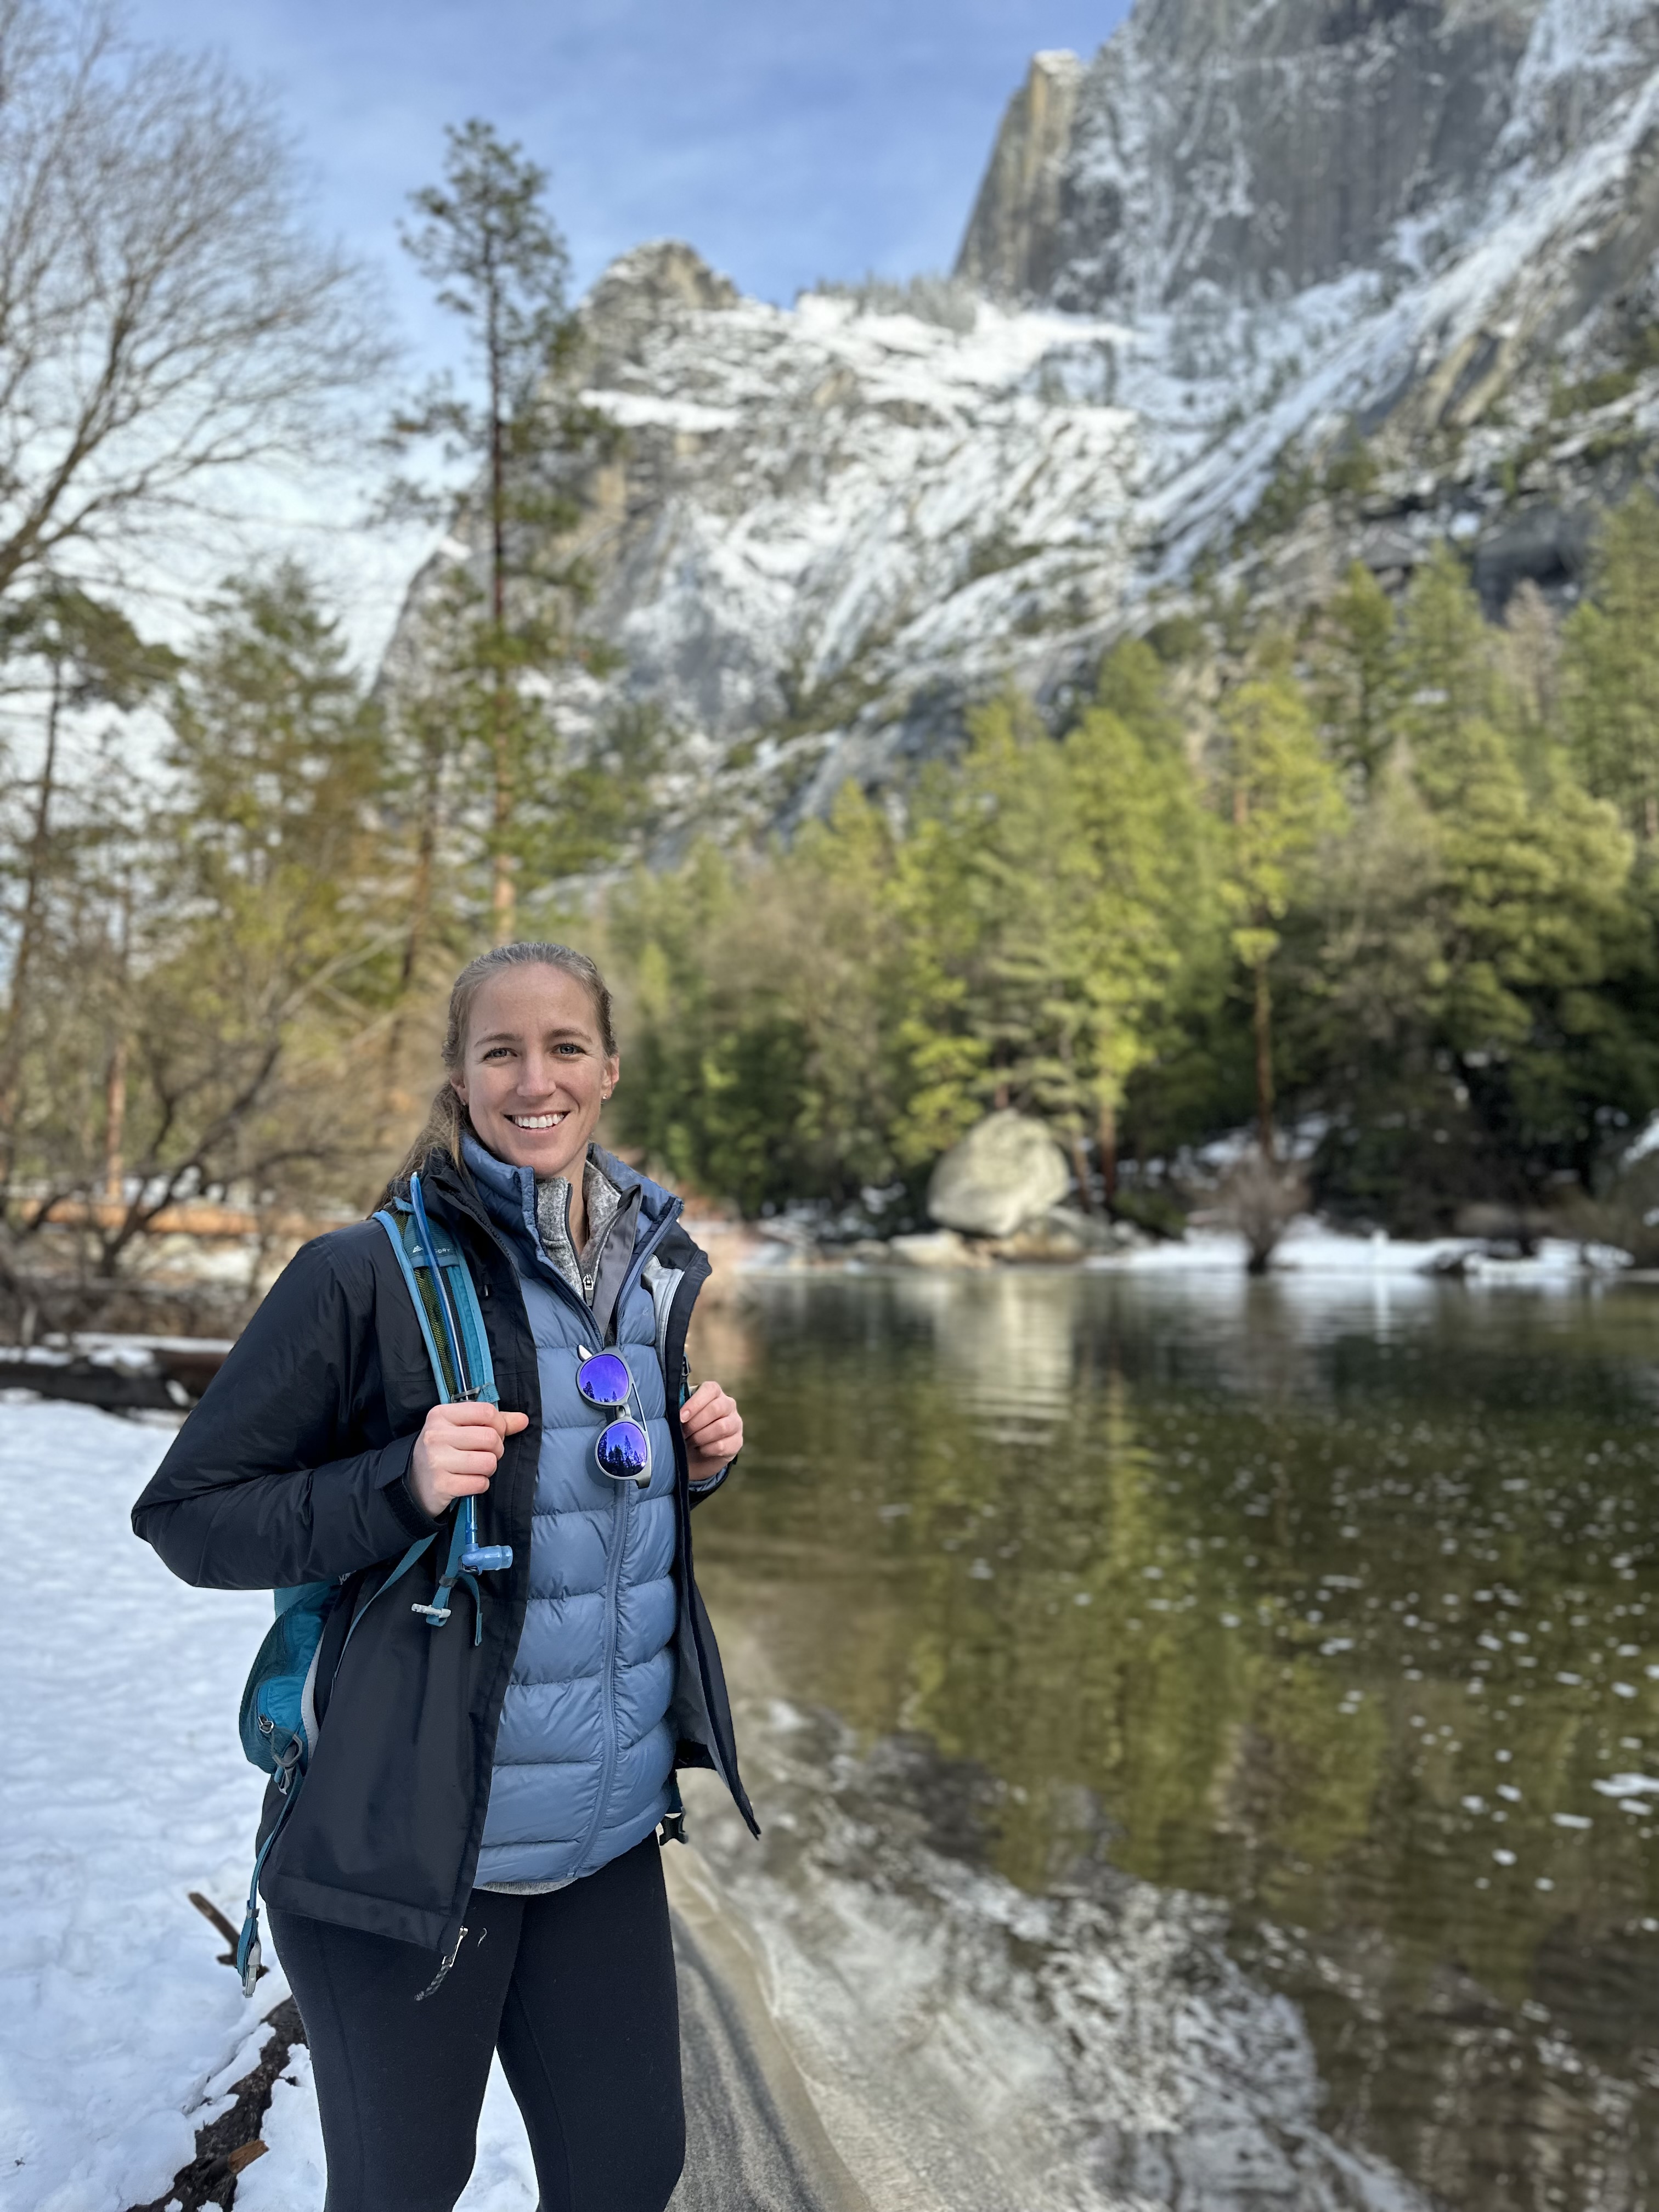 A woman wearing warm layers and a backpack poses next to a river with snow and mountains in the background